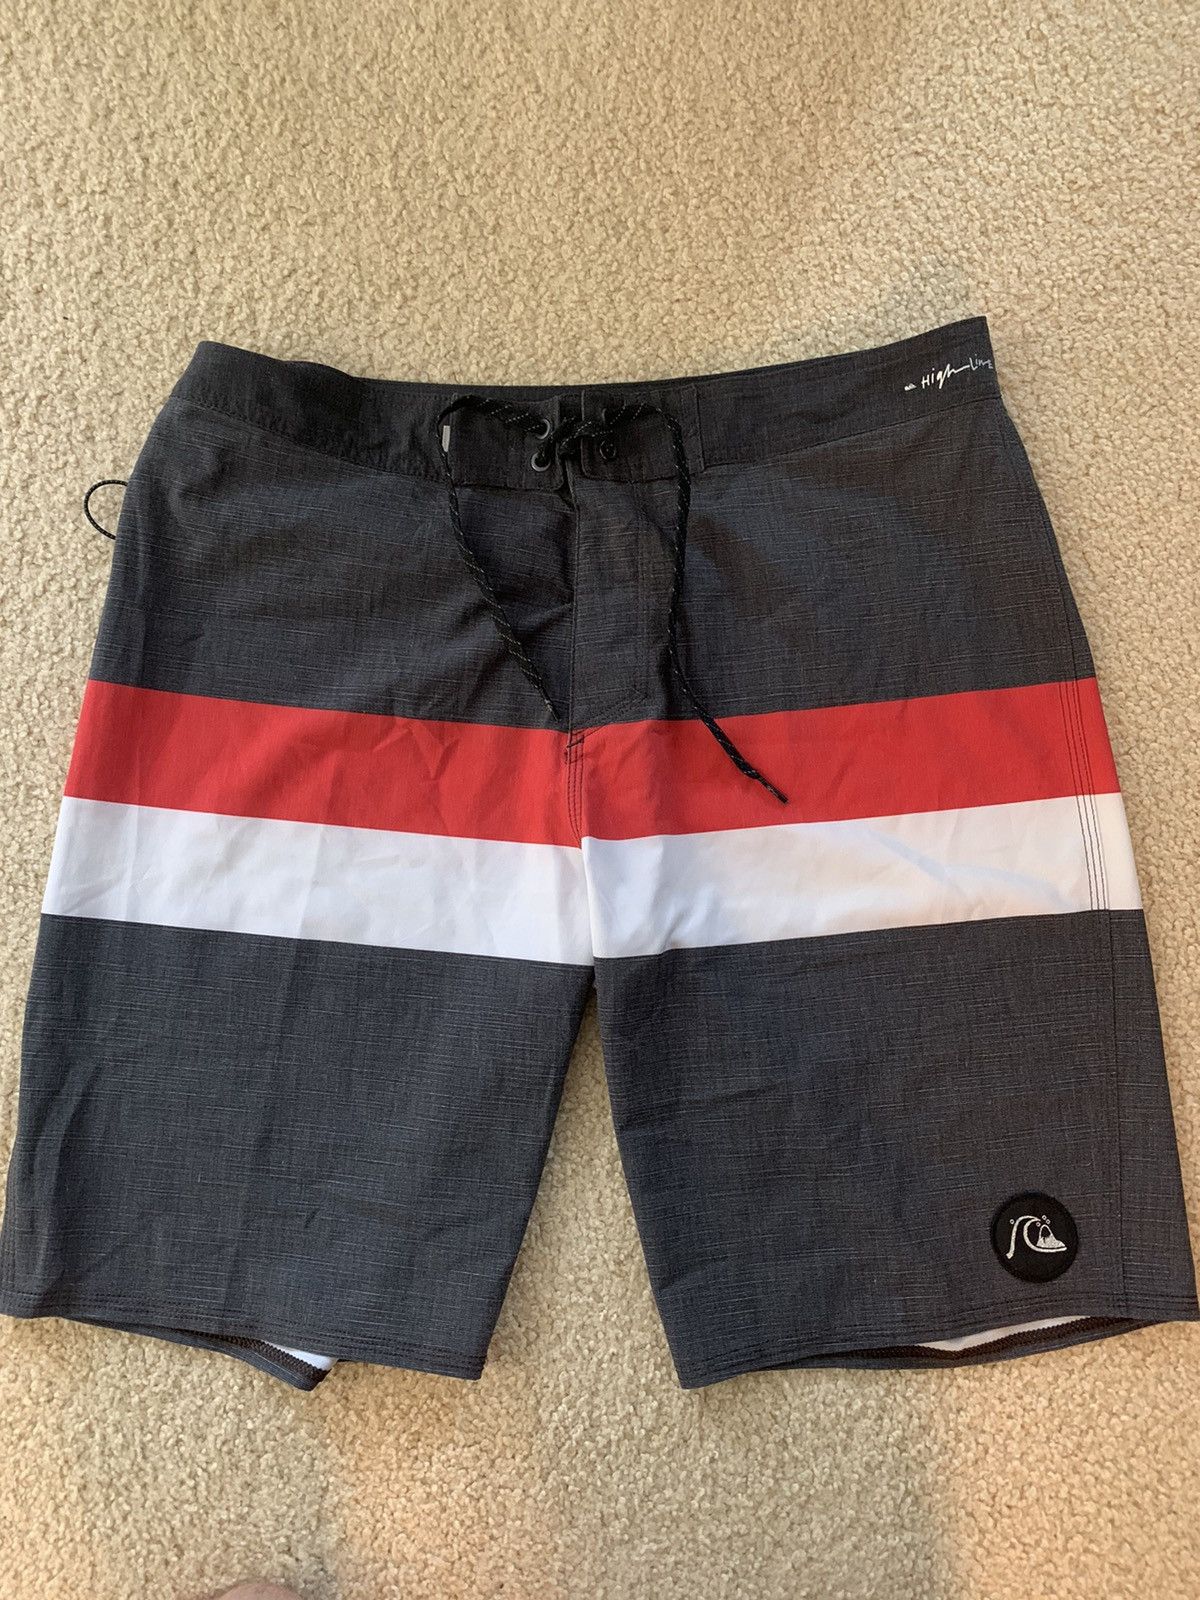 Quiksilver Highline 20 Inch Boardshorts | Grailed